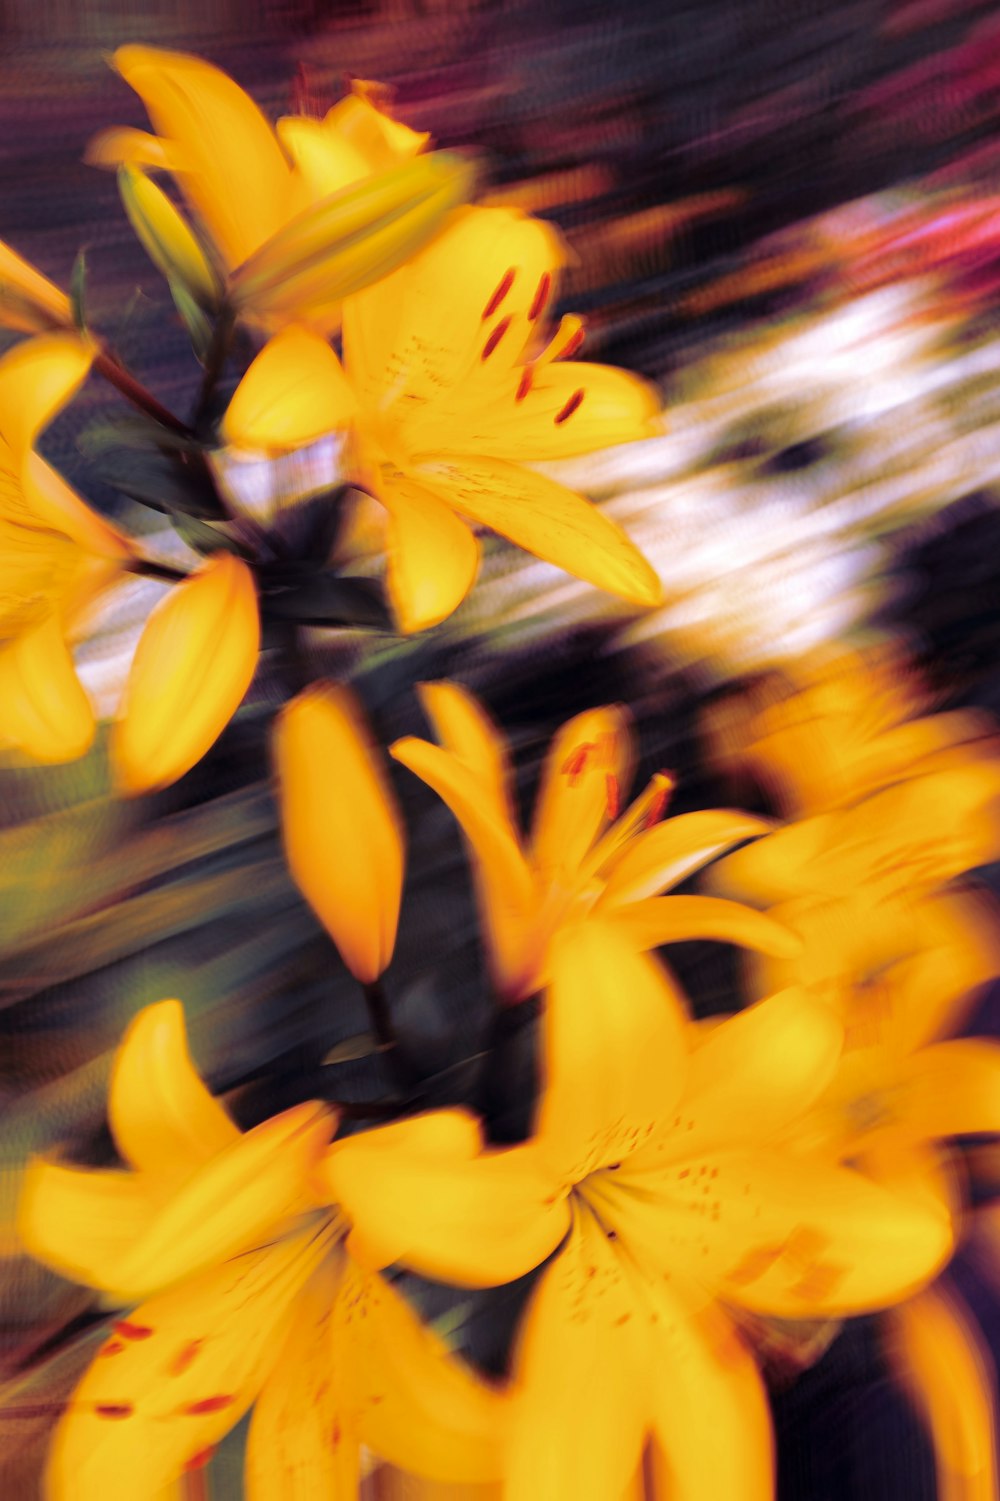 a blurry picture of yellow flowers in a vase